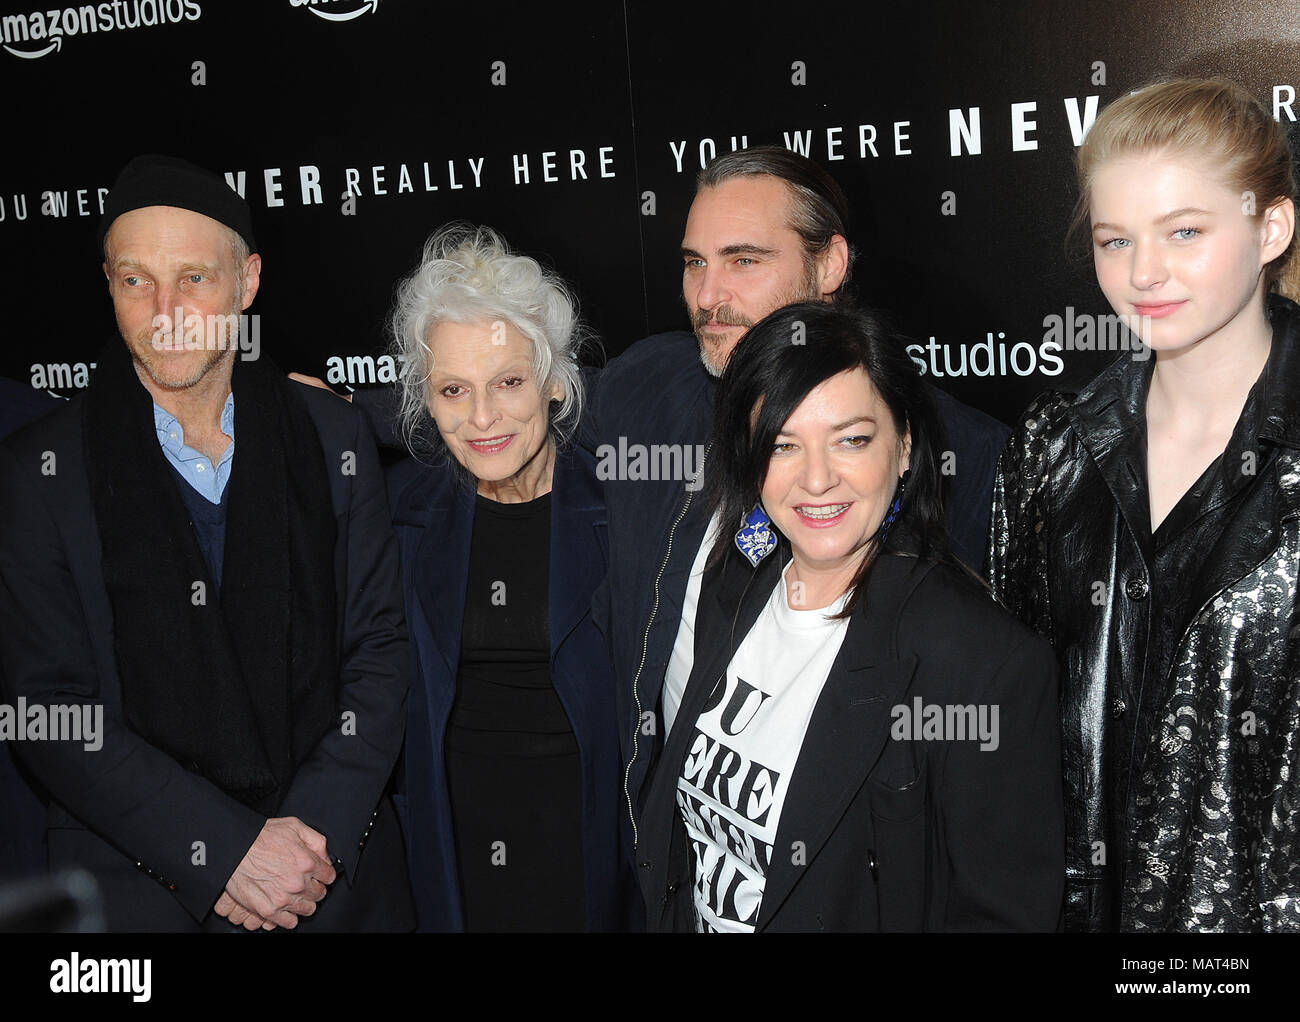 New York, NY, USA. 3rd Apr, 2018. Jonathan Ames, Judith Roberts, Joaquin Phoenix, Lynne Ramsay and Ekaterina Samsonov attends the New York screening for ' You Were Nevere Really Here' at Metrograph on April 3, 2018 in New York City. Credit: John Palmer/Media Punch/Alamy Live News Stock Photo